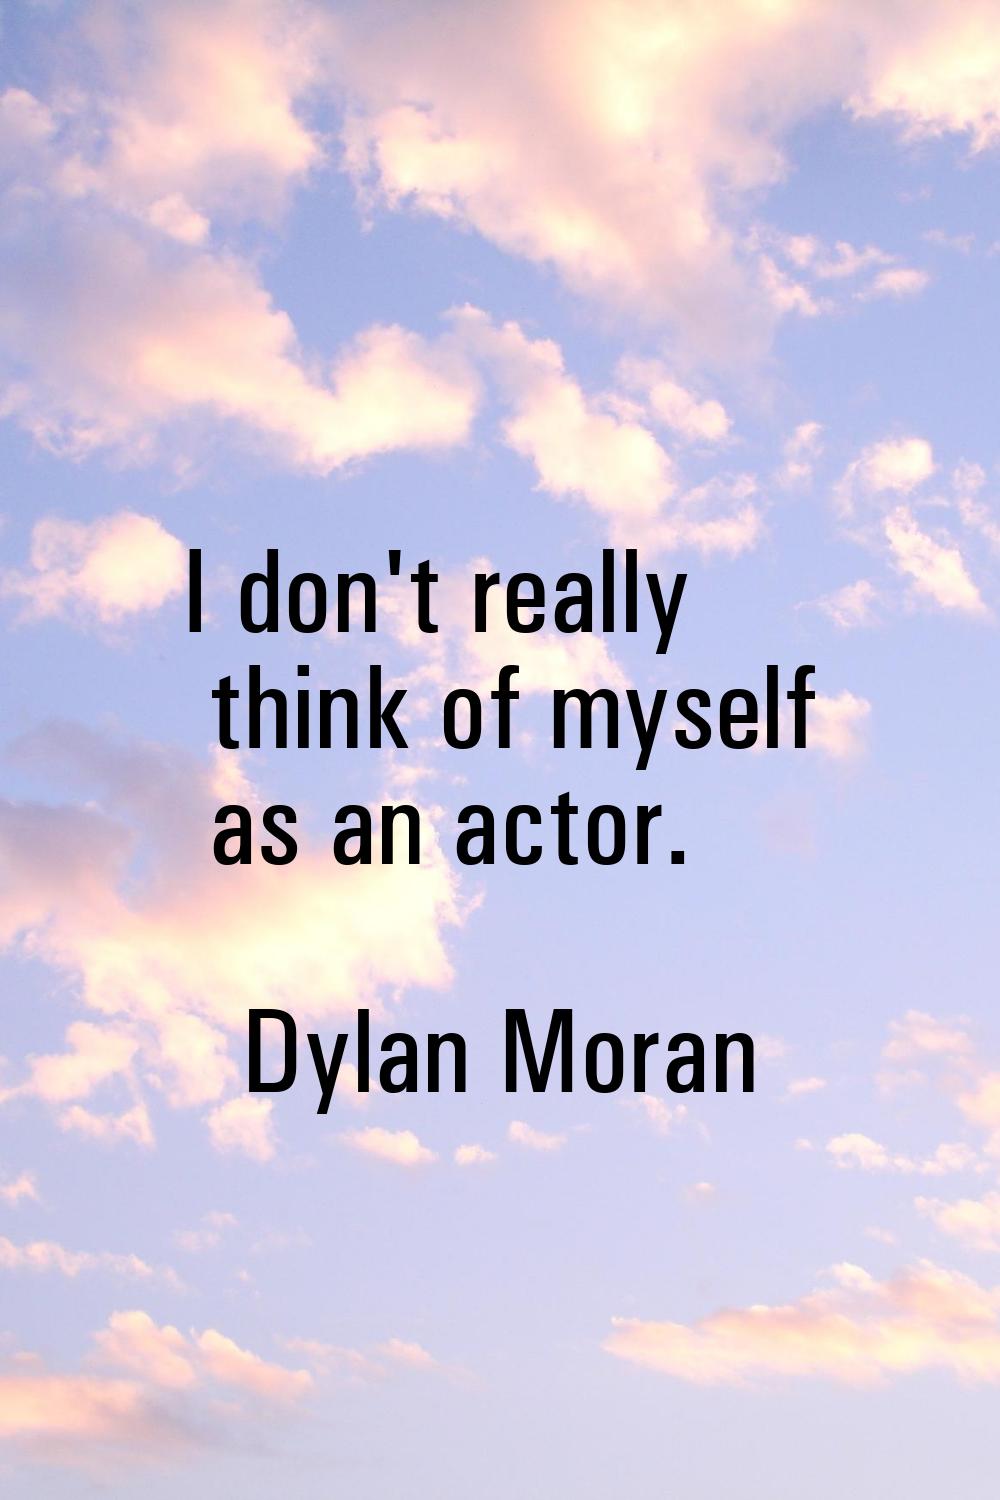 I don't really think of myself as an actor.